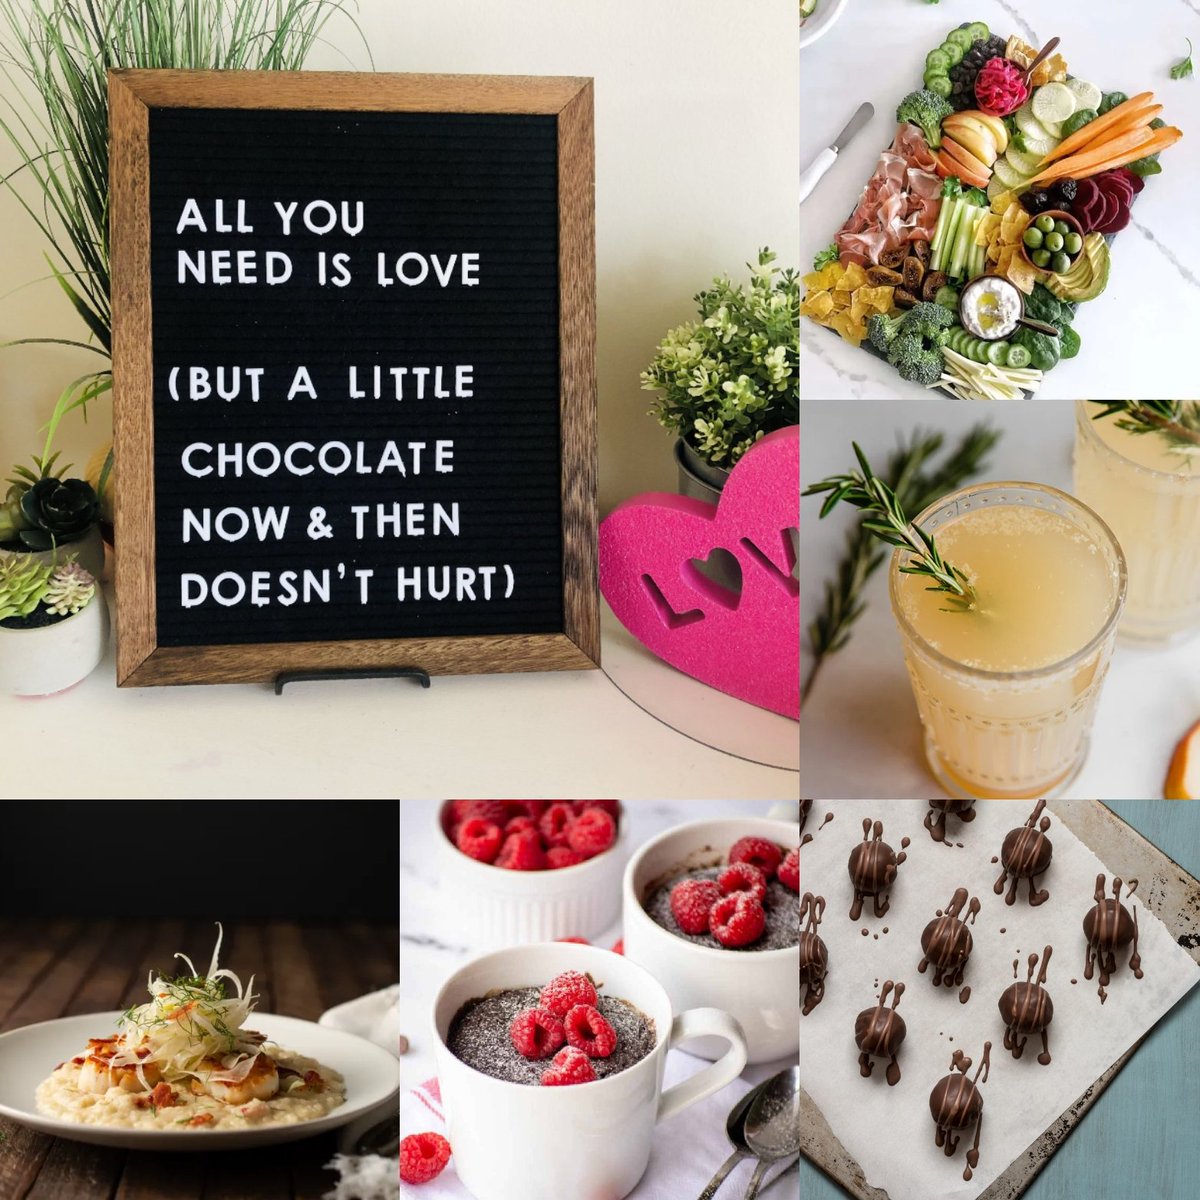 ❤🤍 Sweet AIP Simplicity 🤍❤
Grab the Newsletter - bit.ly/aiprecipenews
and get this Sweet AIP Menu just in time for #valentinesday 

#aip #autoimmuneprotocol #glutenfree #grainfree #dairyfree #nutfree #nightshadefree #dairyfree #soyfree  #aipbreakfast #aiprecipes #aipgifts